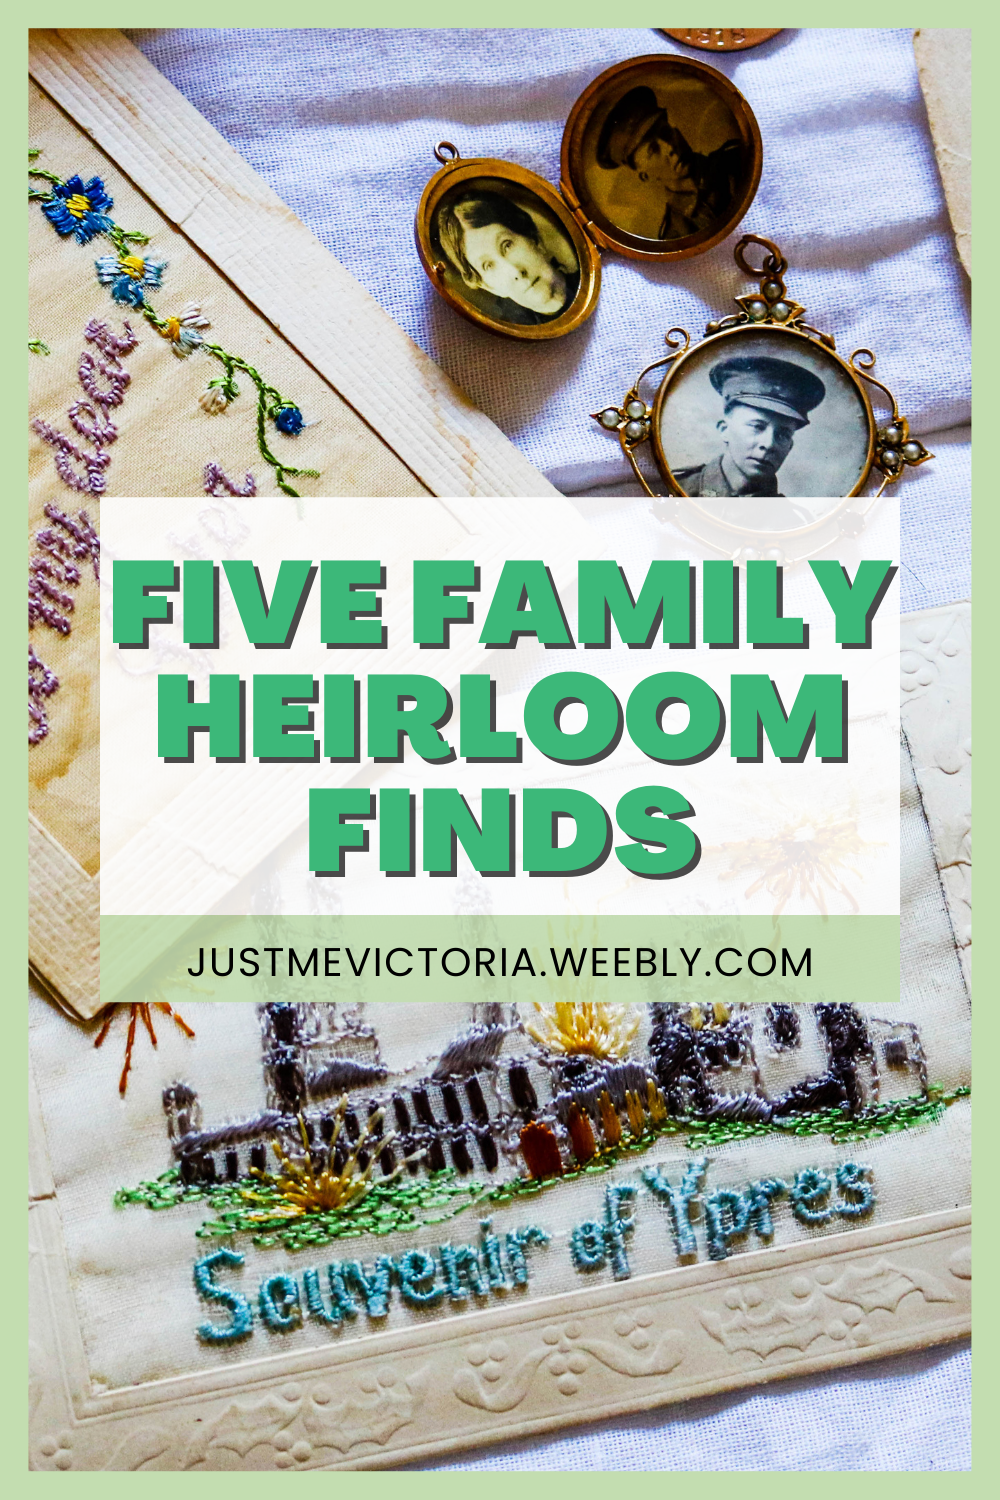 Five Family Heirloom Finds